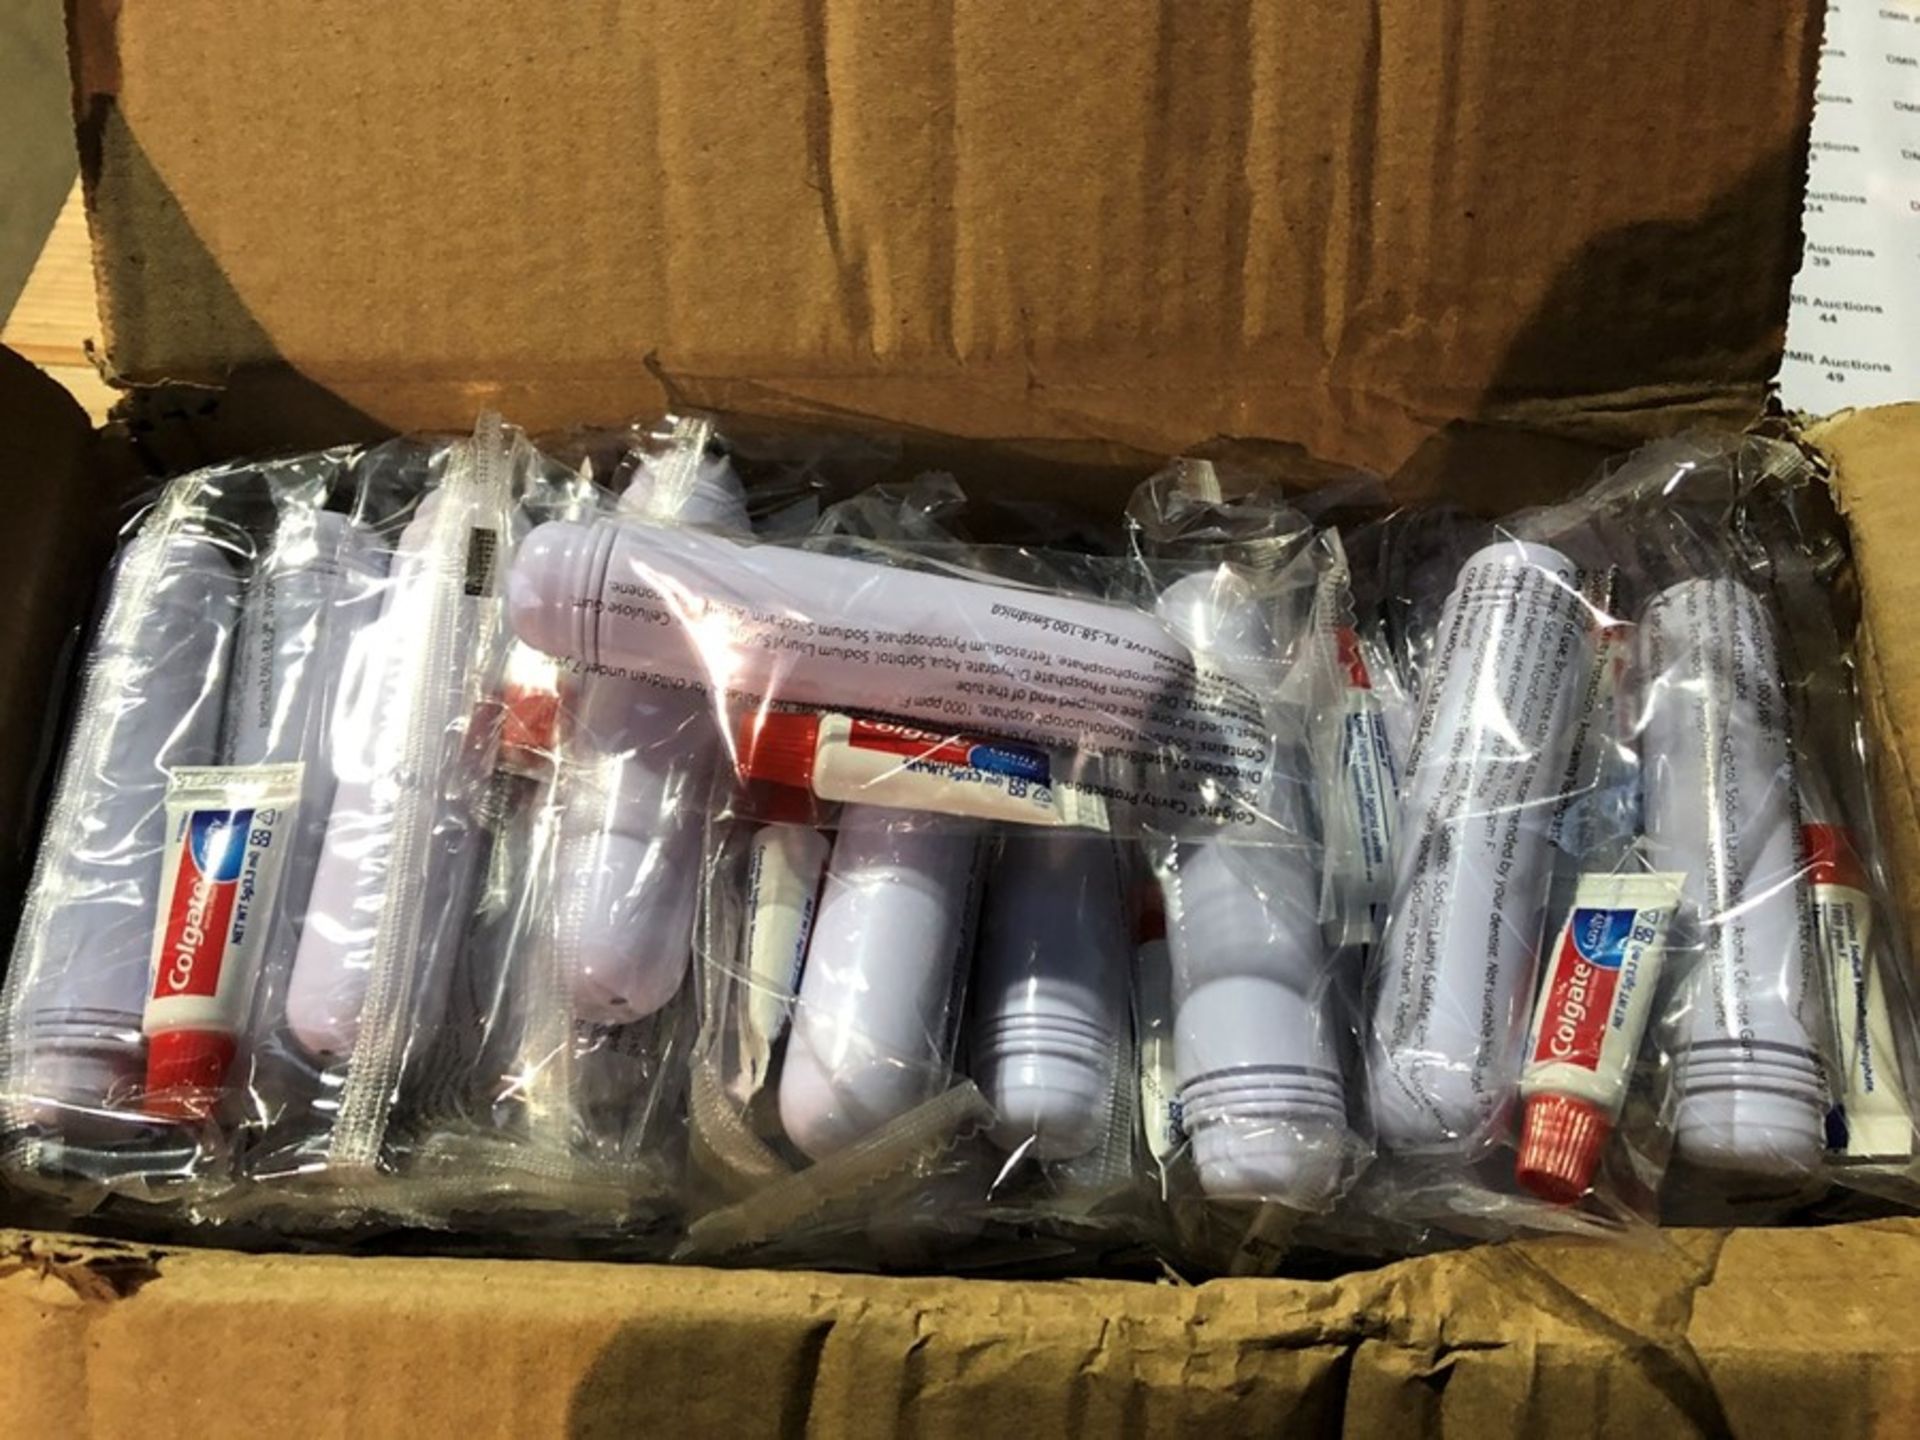 1 LOT TO CONTAIN A SMALL BOX FILLED WITH COLGATE TOOTHPASTE WITH PLASTIC TUBES (PUBLIC VIEWING